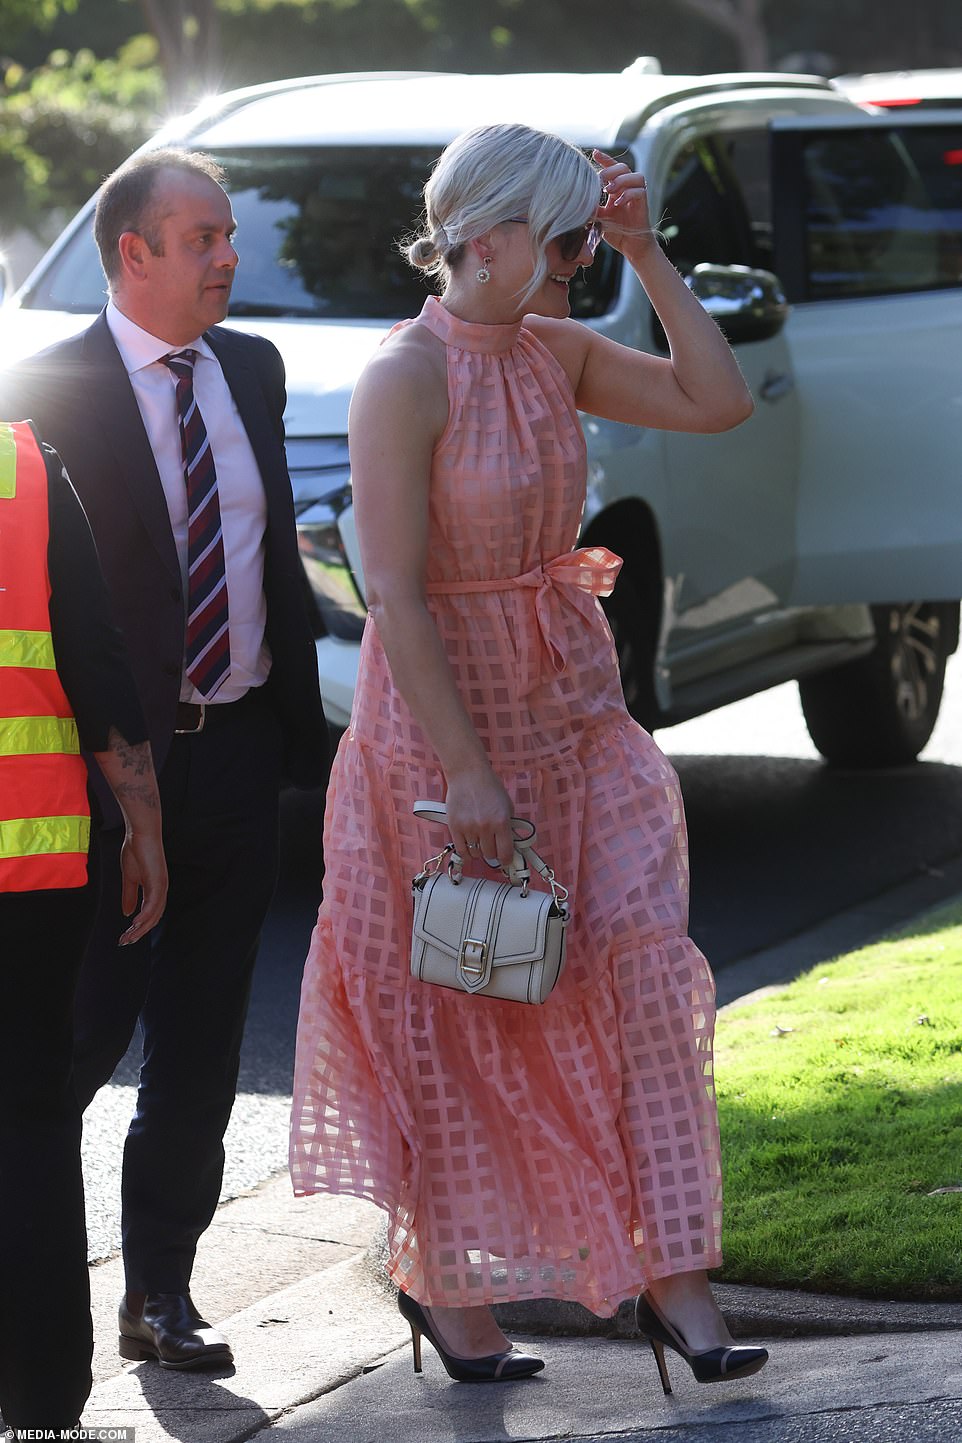 australia's political elites join the uber-wealthy to watch katy perry perform at vip party hosted by billionaire businessman at his $100million estate